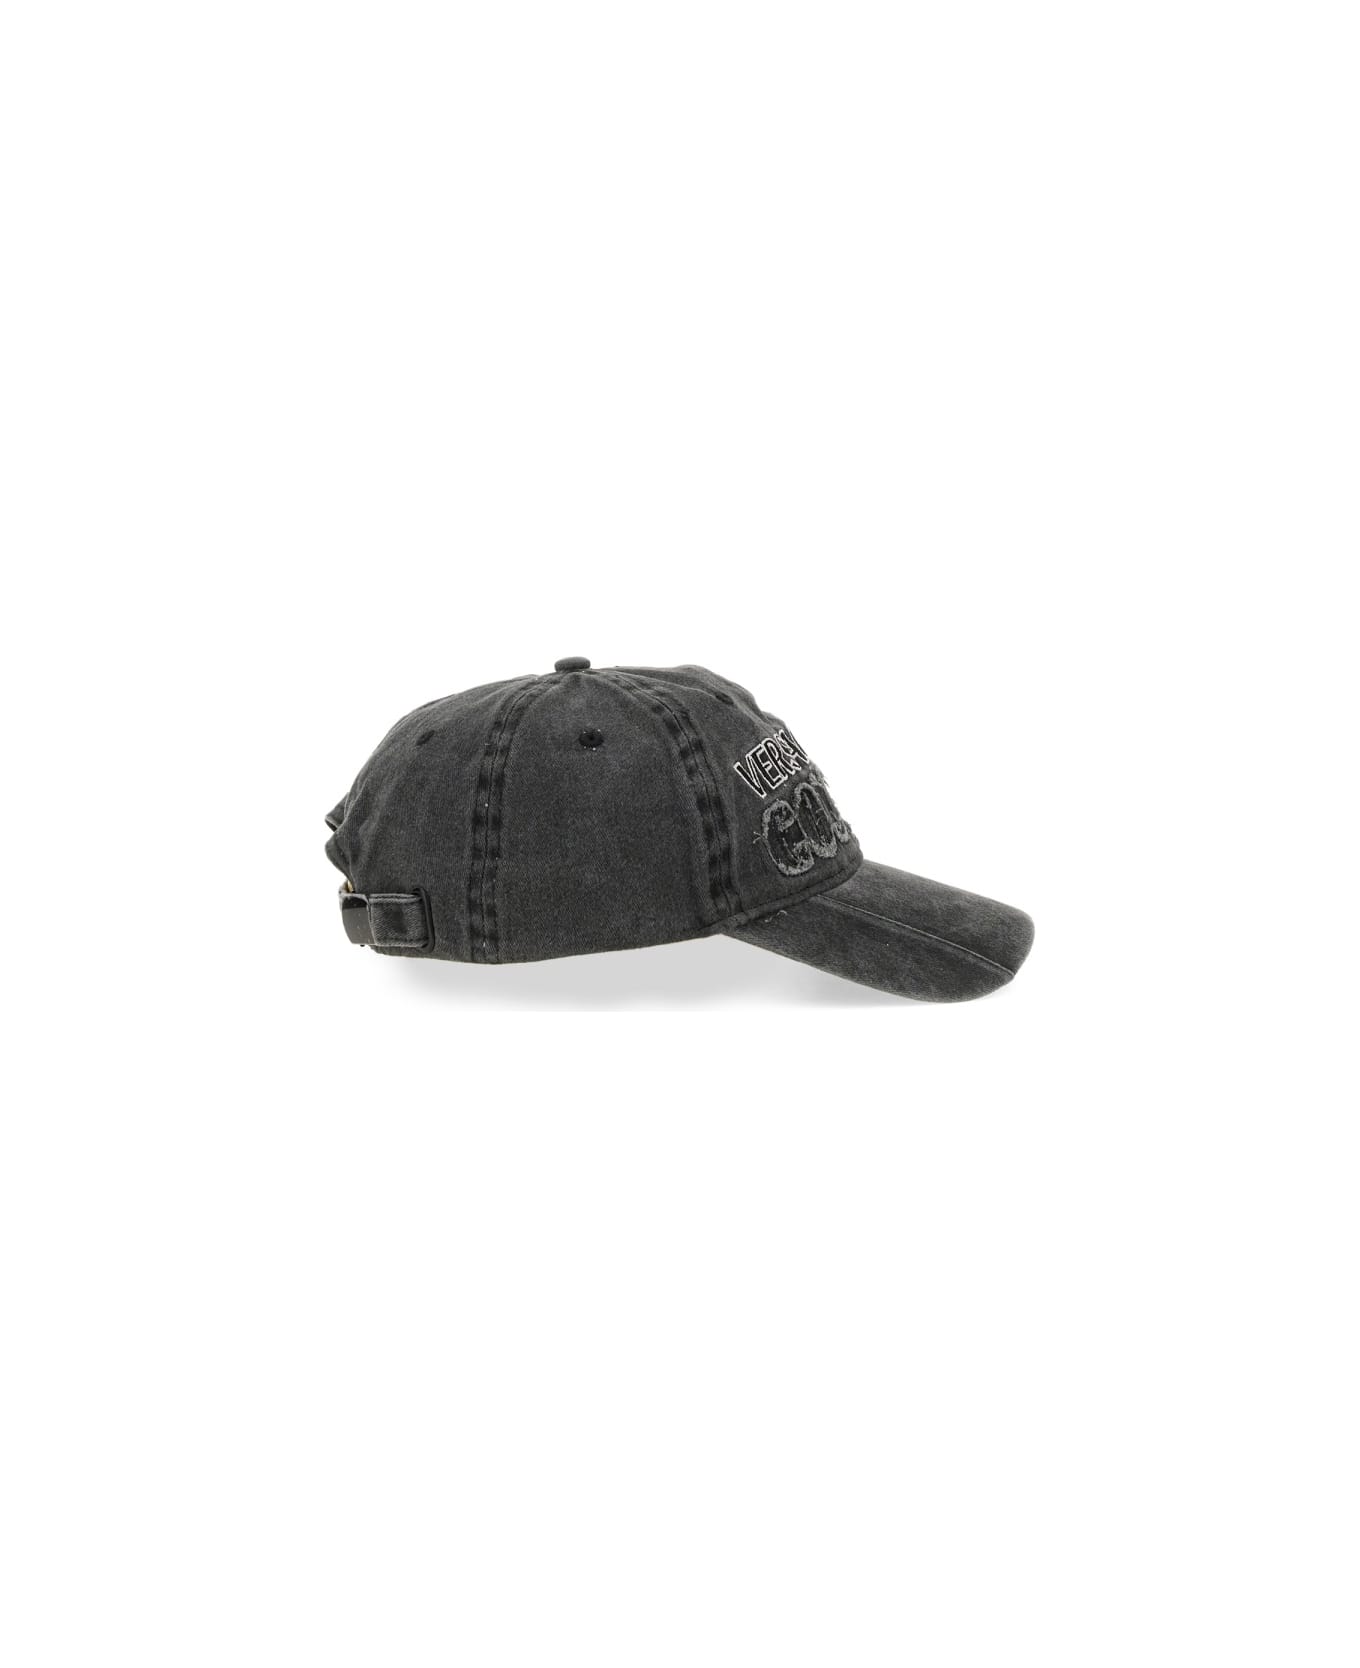 Versace Jeans Couture Baseball Hat With Logo - BLACK 帽子